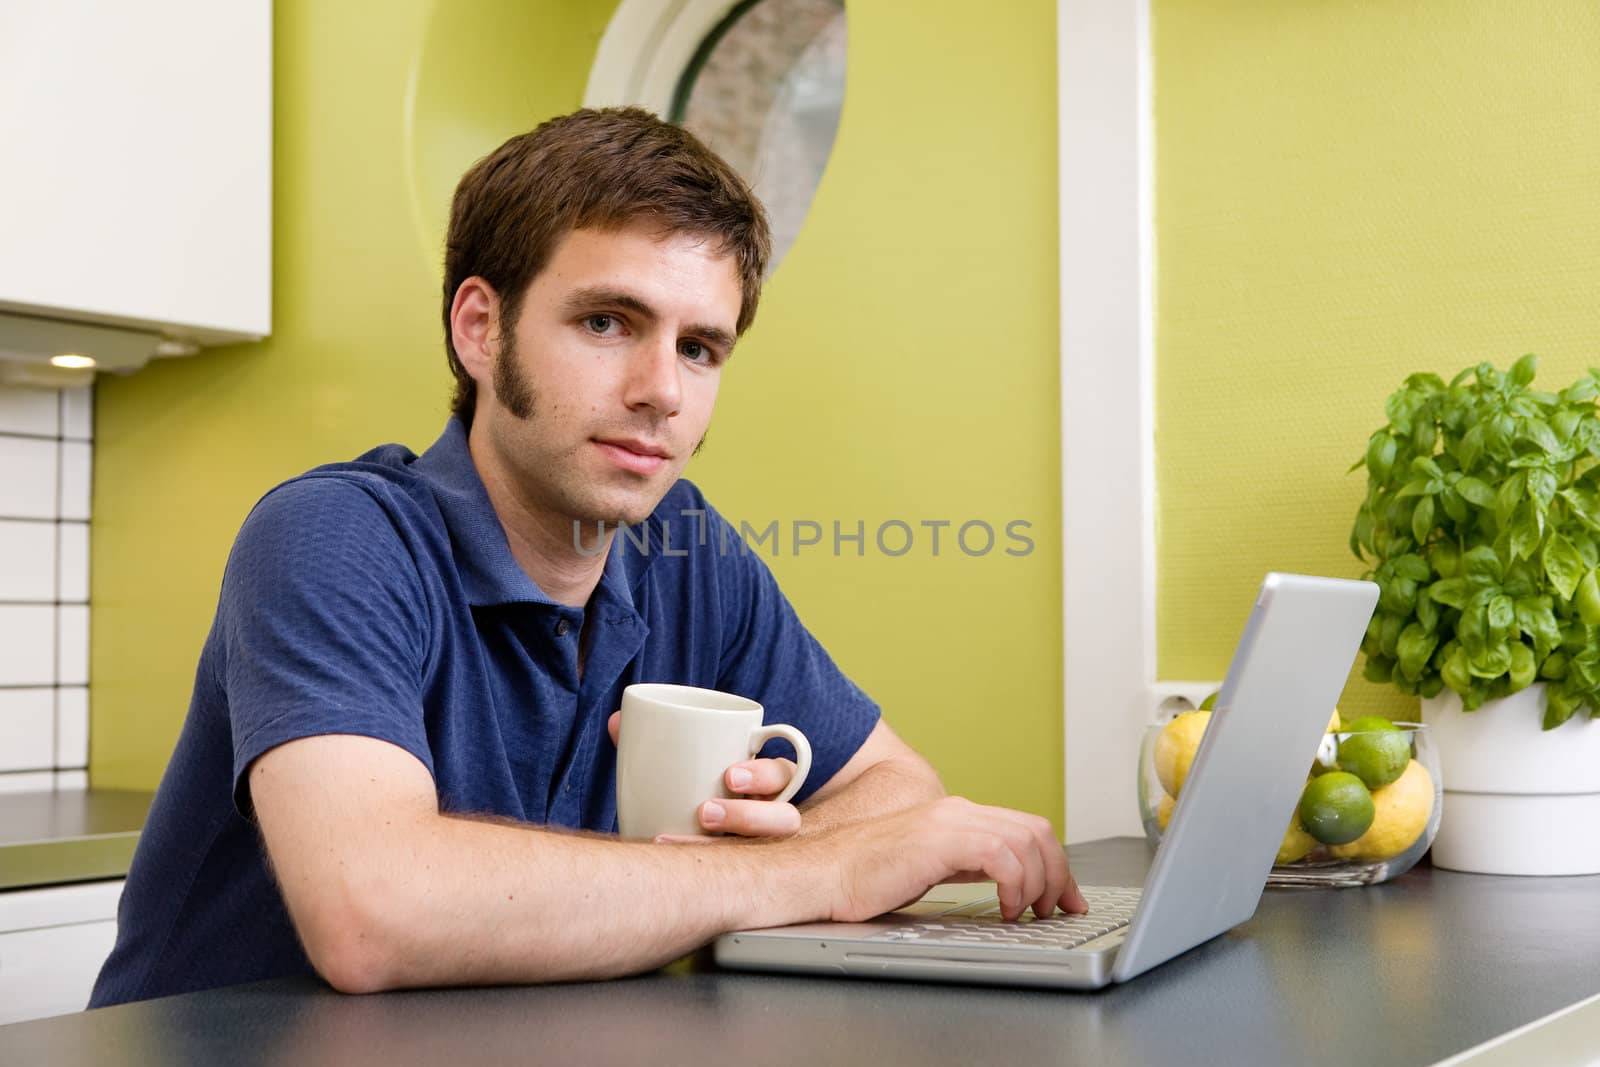 A young man uses the computer in the kitchen while enjoying a warm drink